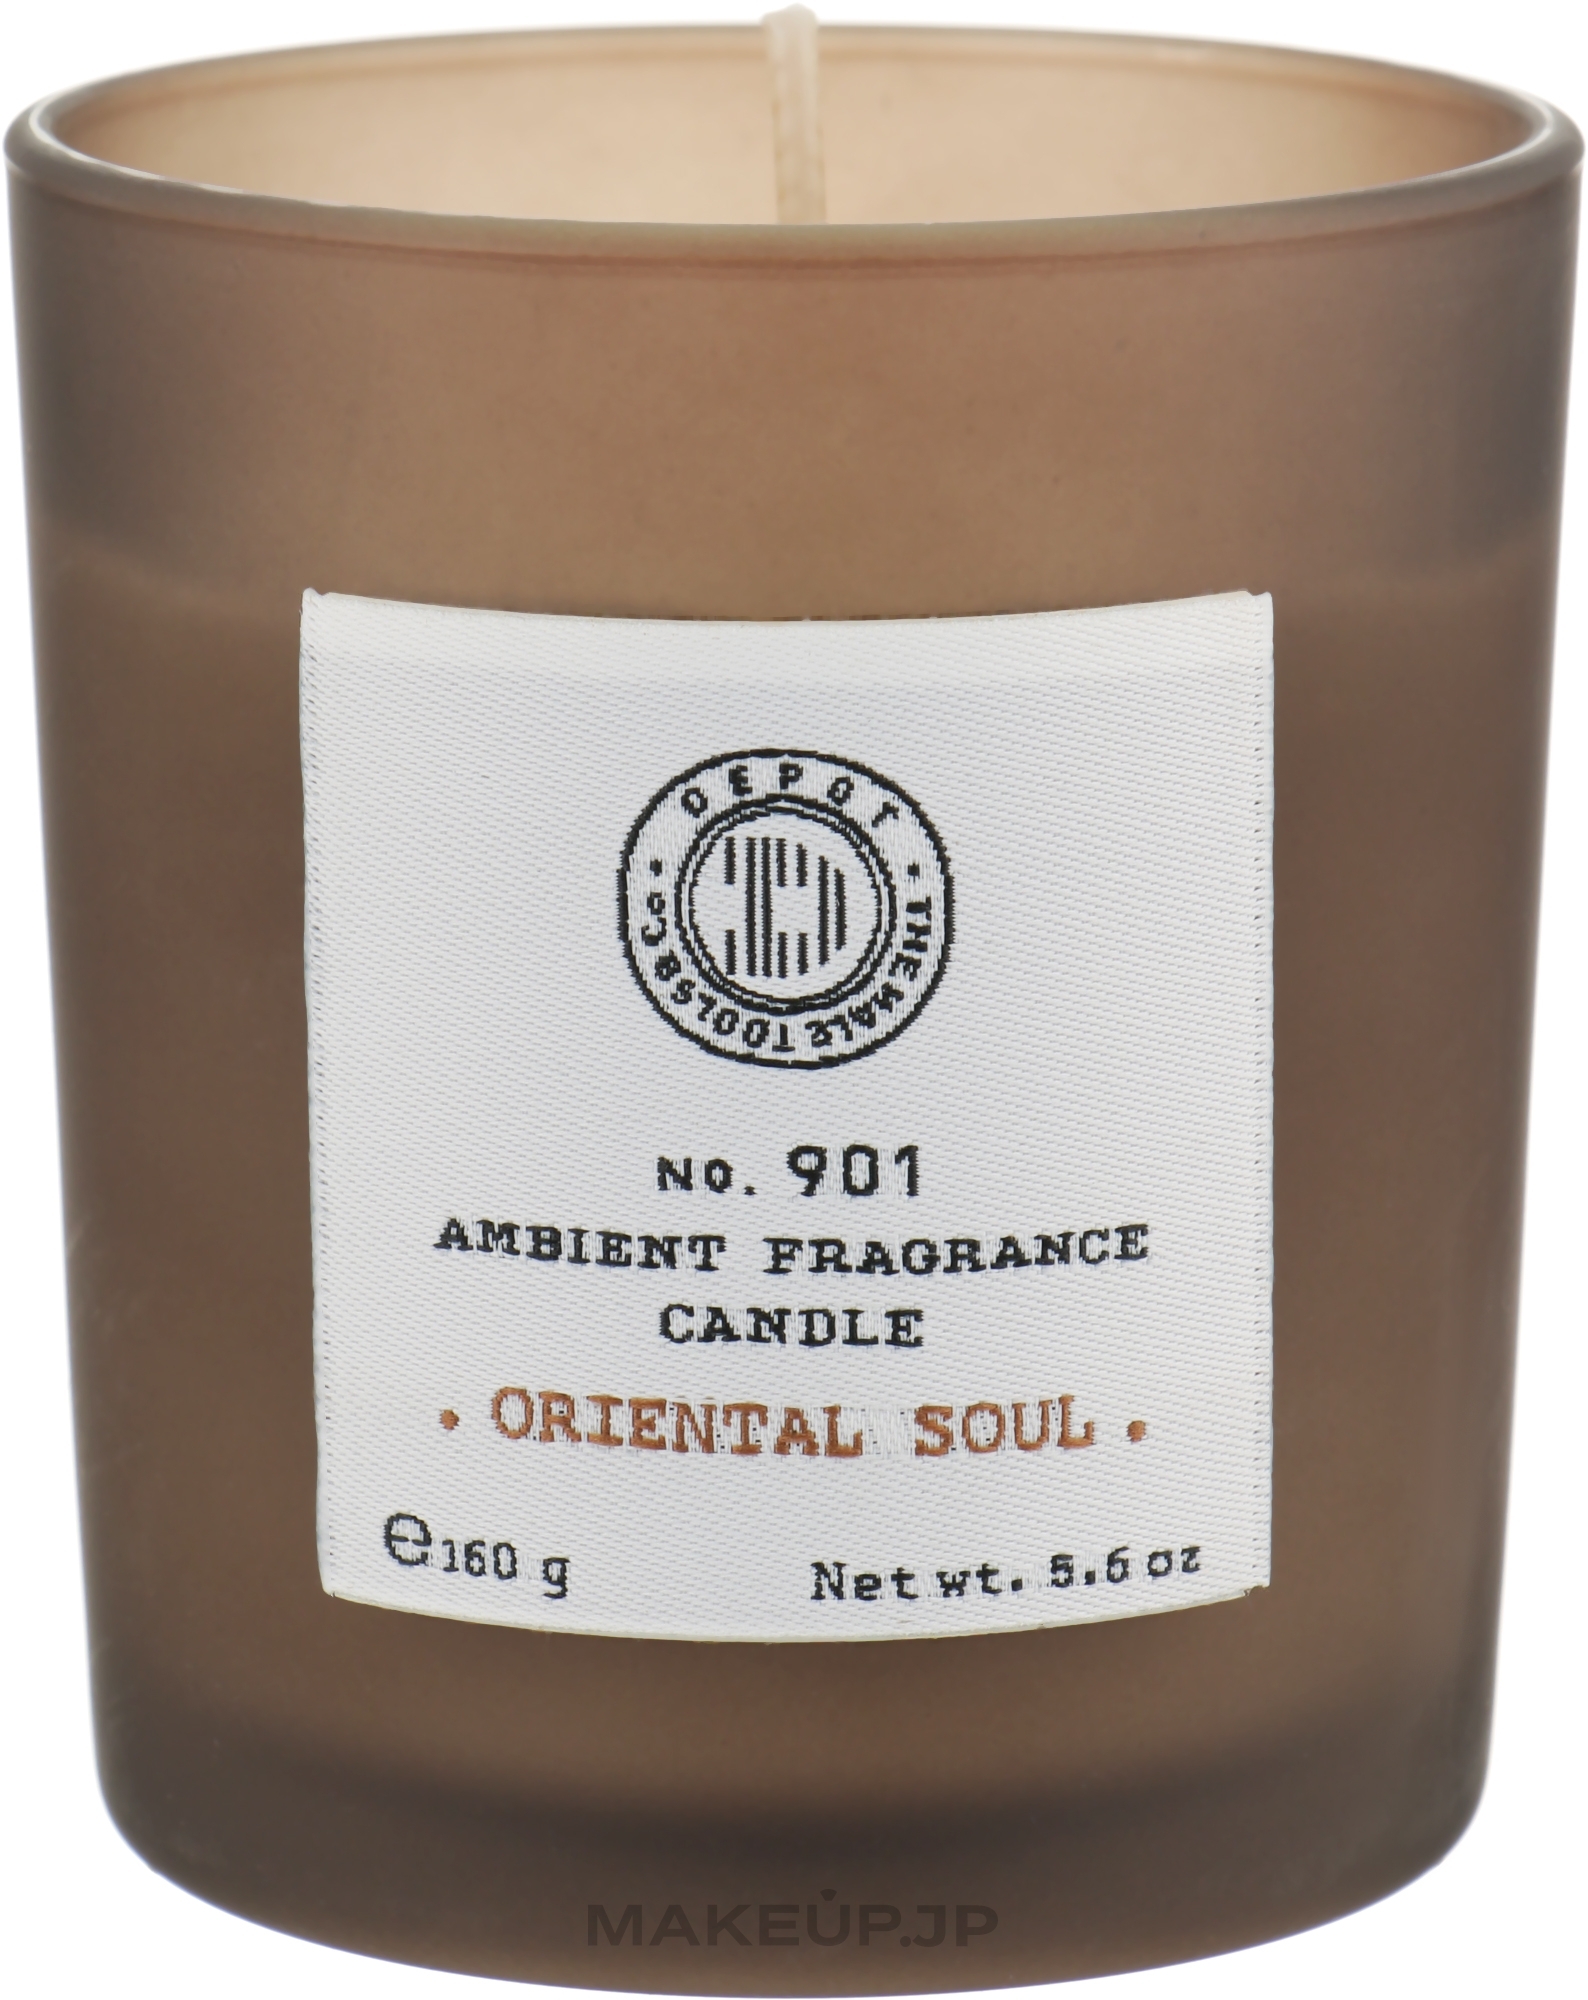 Oriental Scented Candle - Depot 901 Ambient Fragrance Candle Oriental Soul — photo 160 g